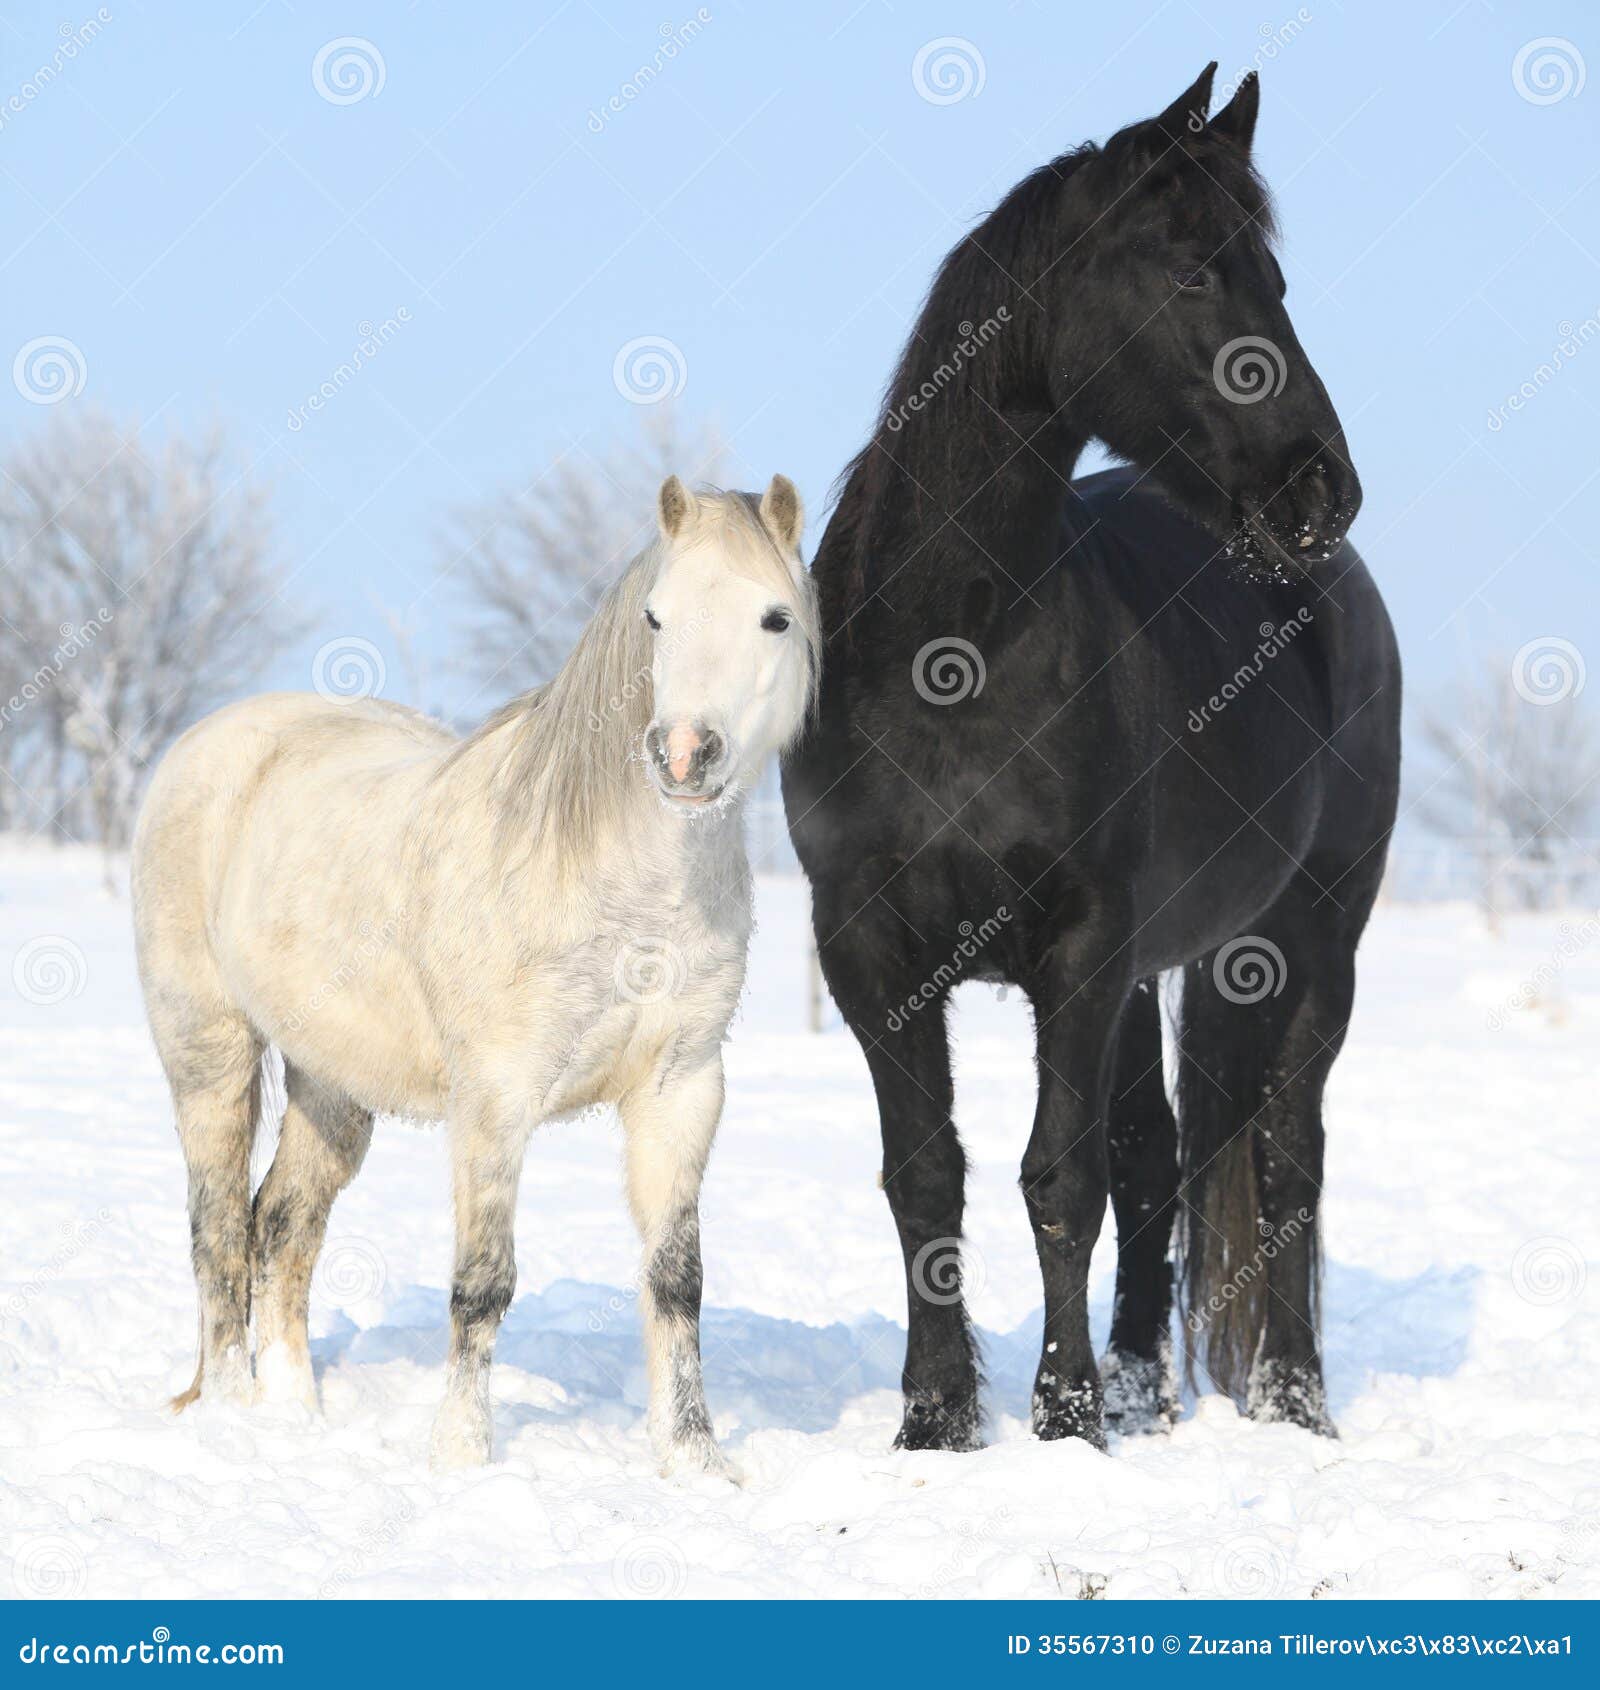 Black horse and white pony together in winter